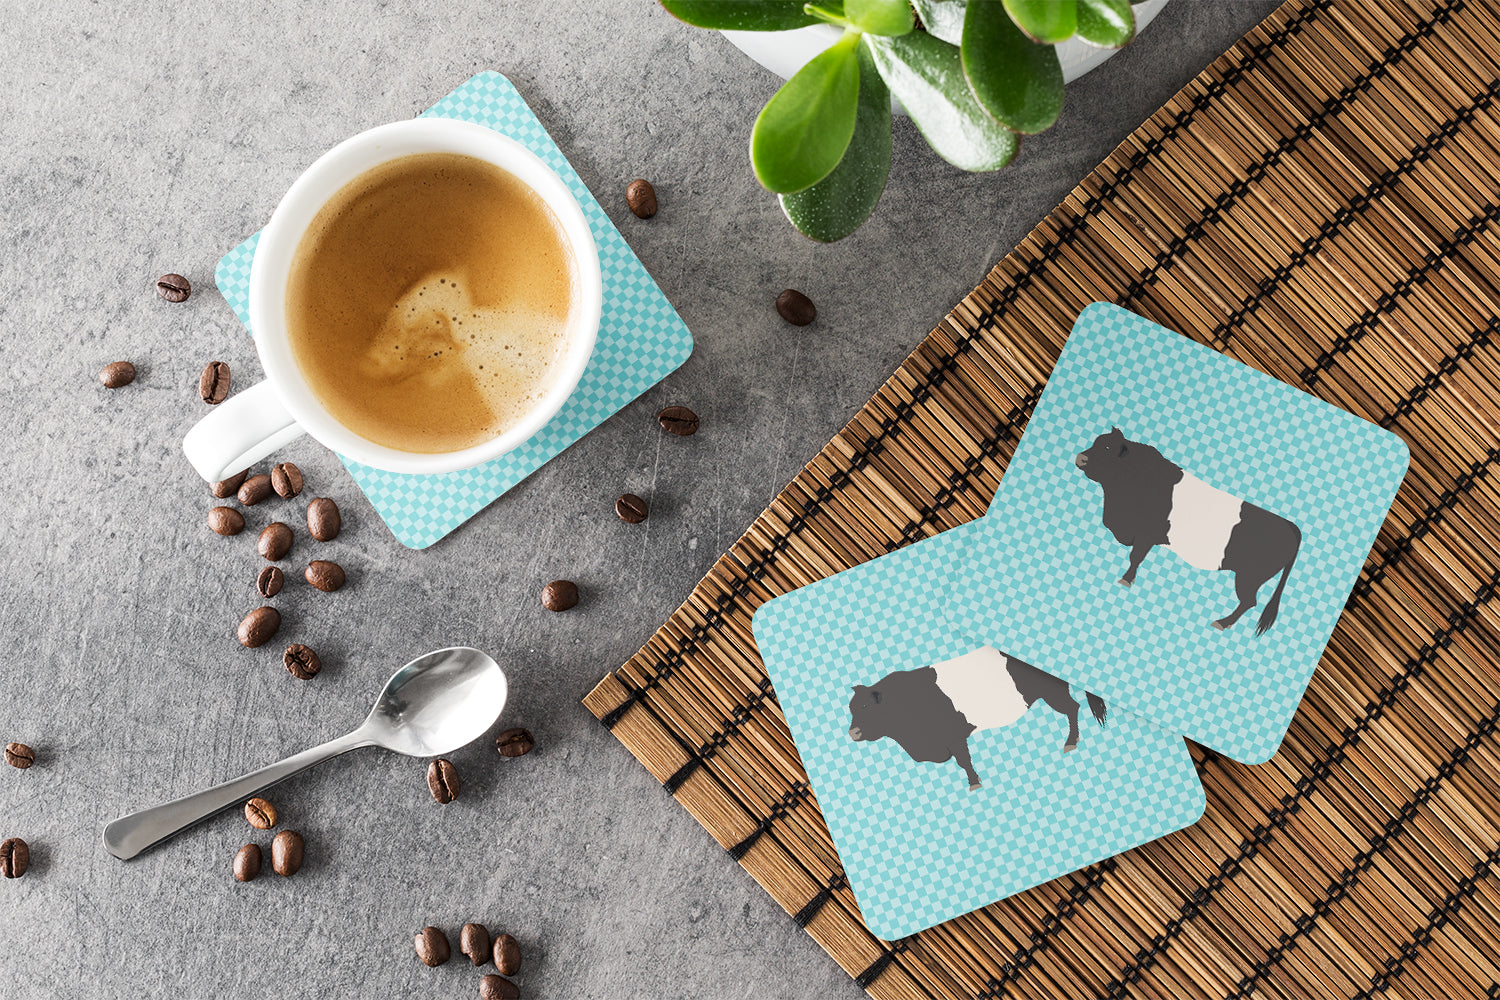 Belted Galloway Cow Blue Check Foam Coaster Set of 4 BB8005FC - the-store.com